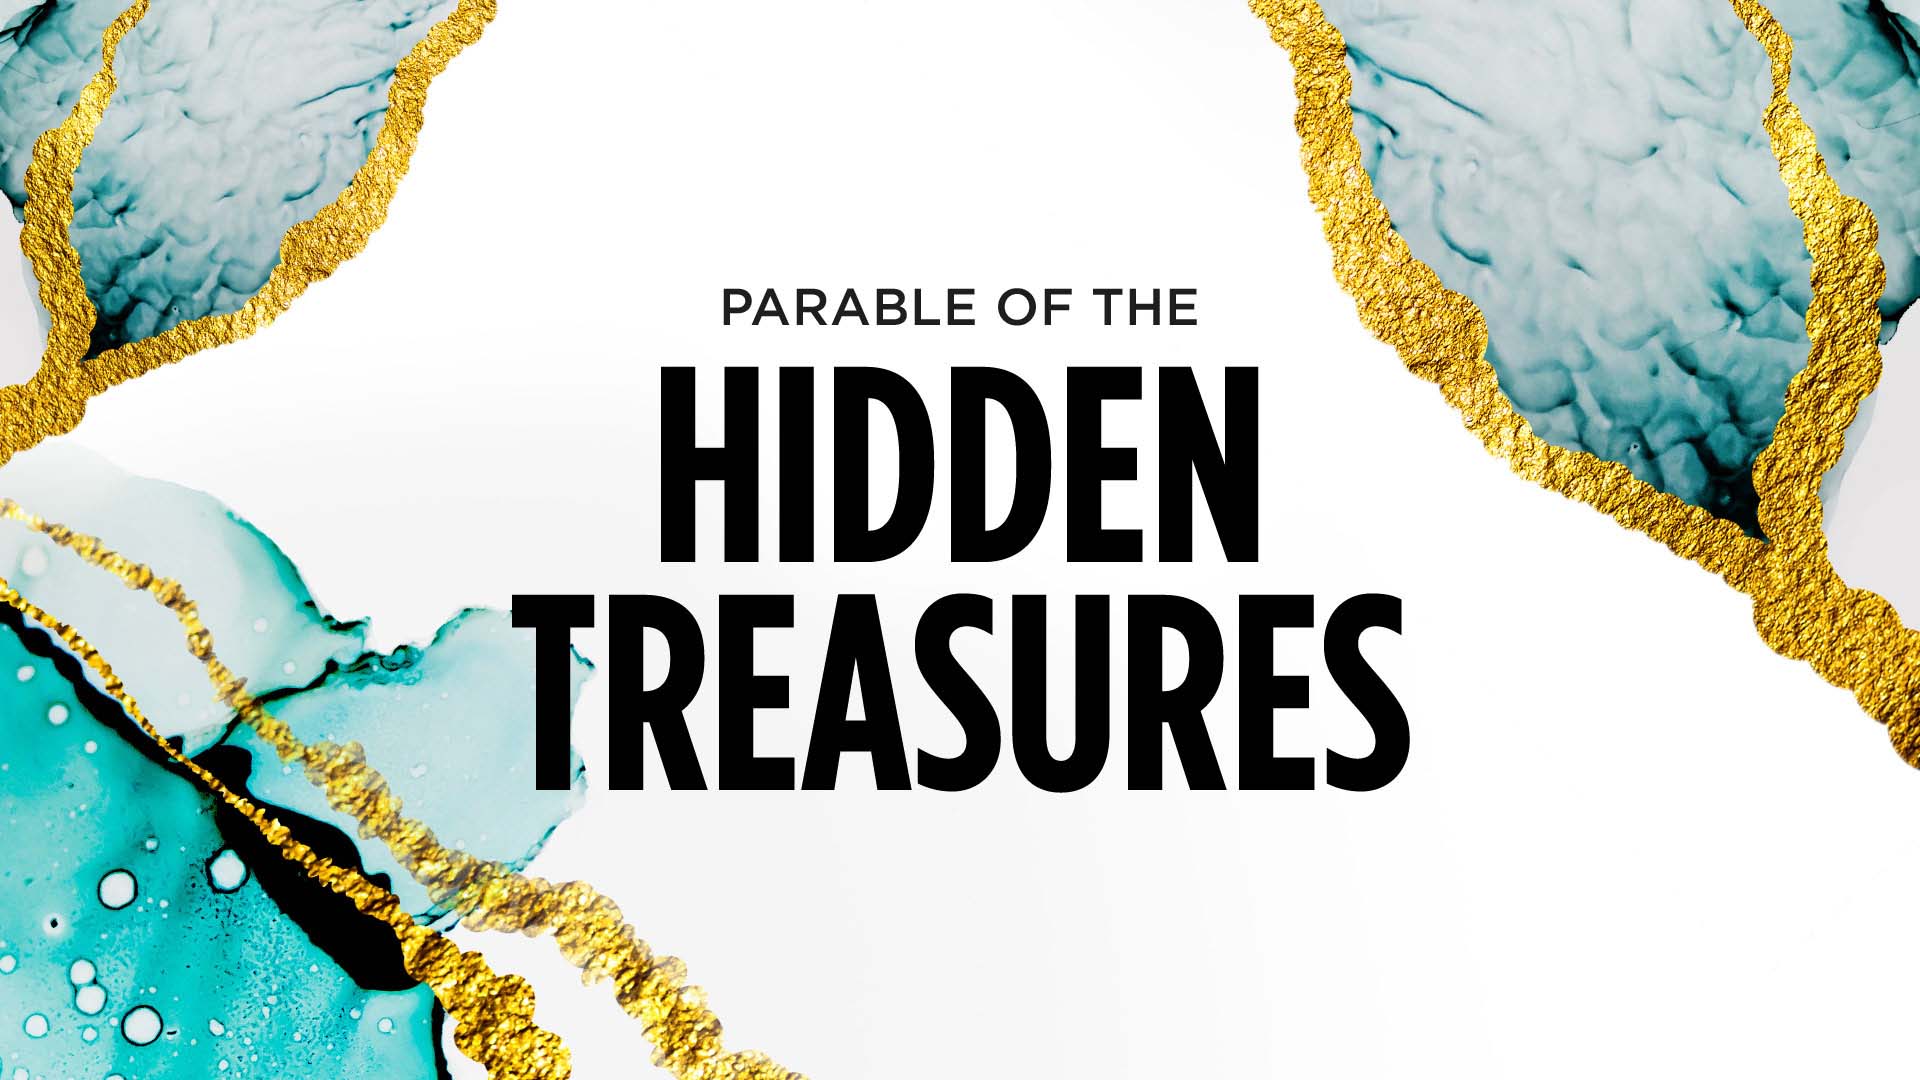 Parable of the Hidden Treasures